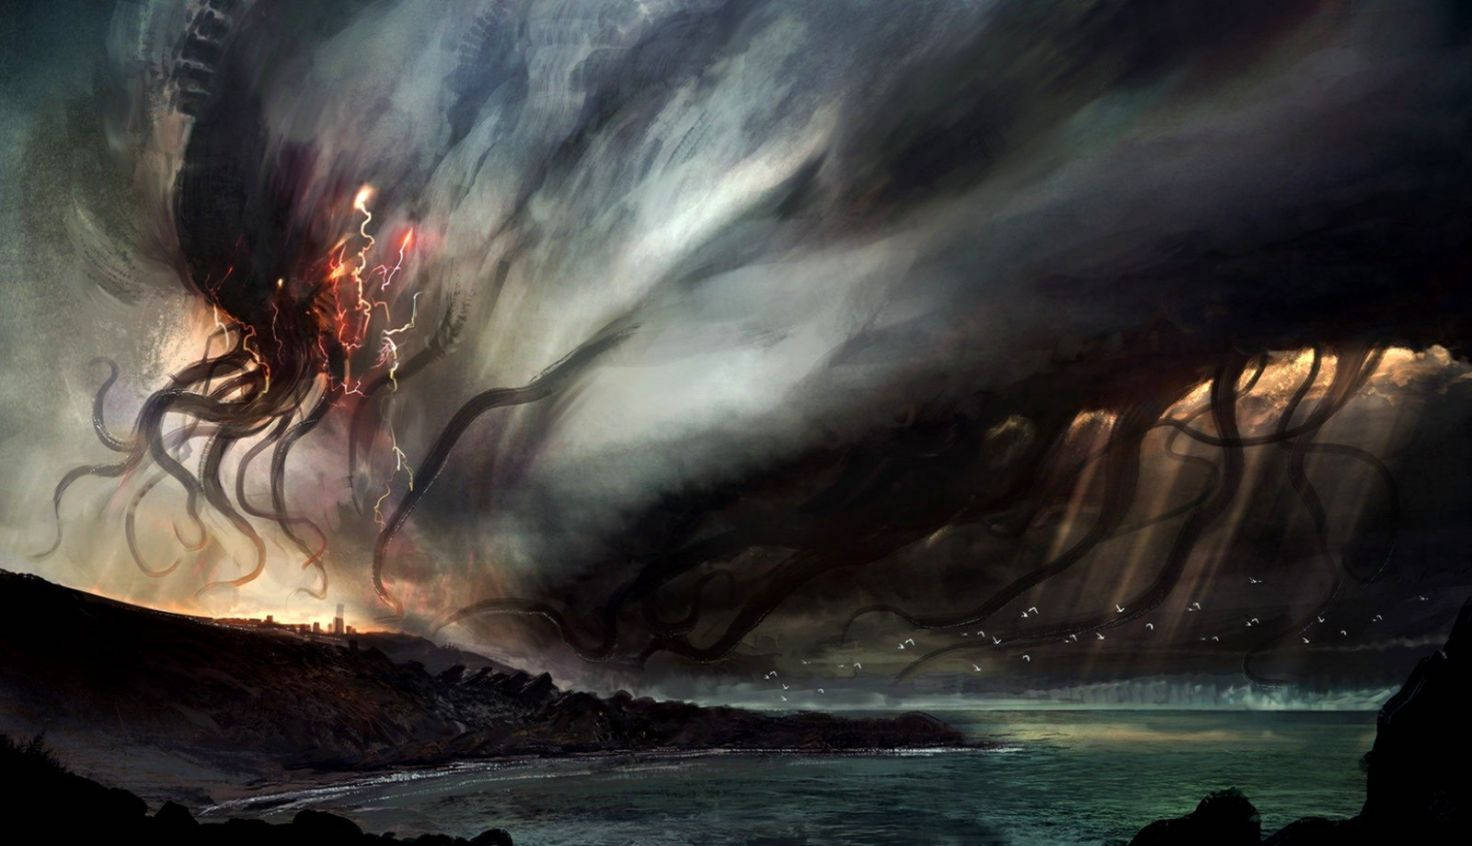 Cthulhu Emerging from the Stormy Depths Wallpaper